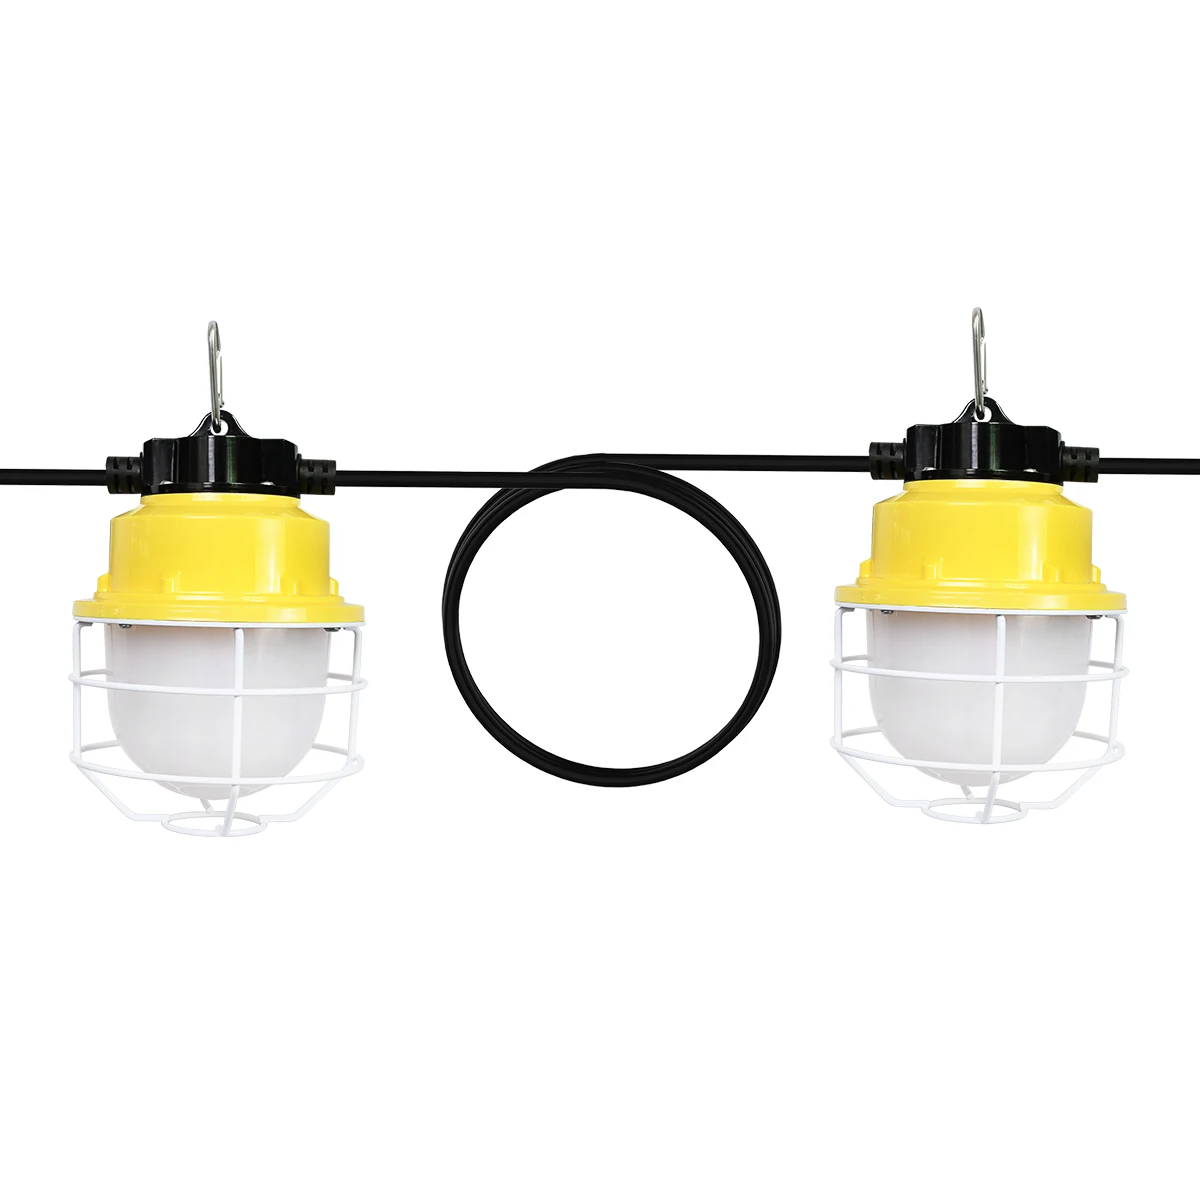 Hot sell  LED String Light 60W 80W Construction Work Temporary lighting multiple mounting